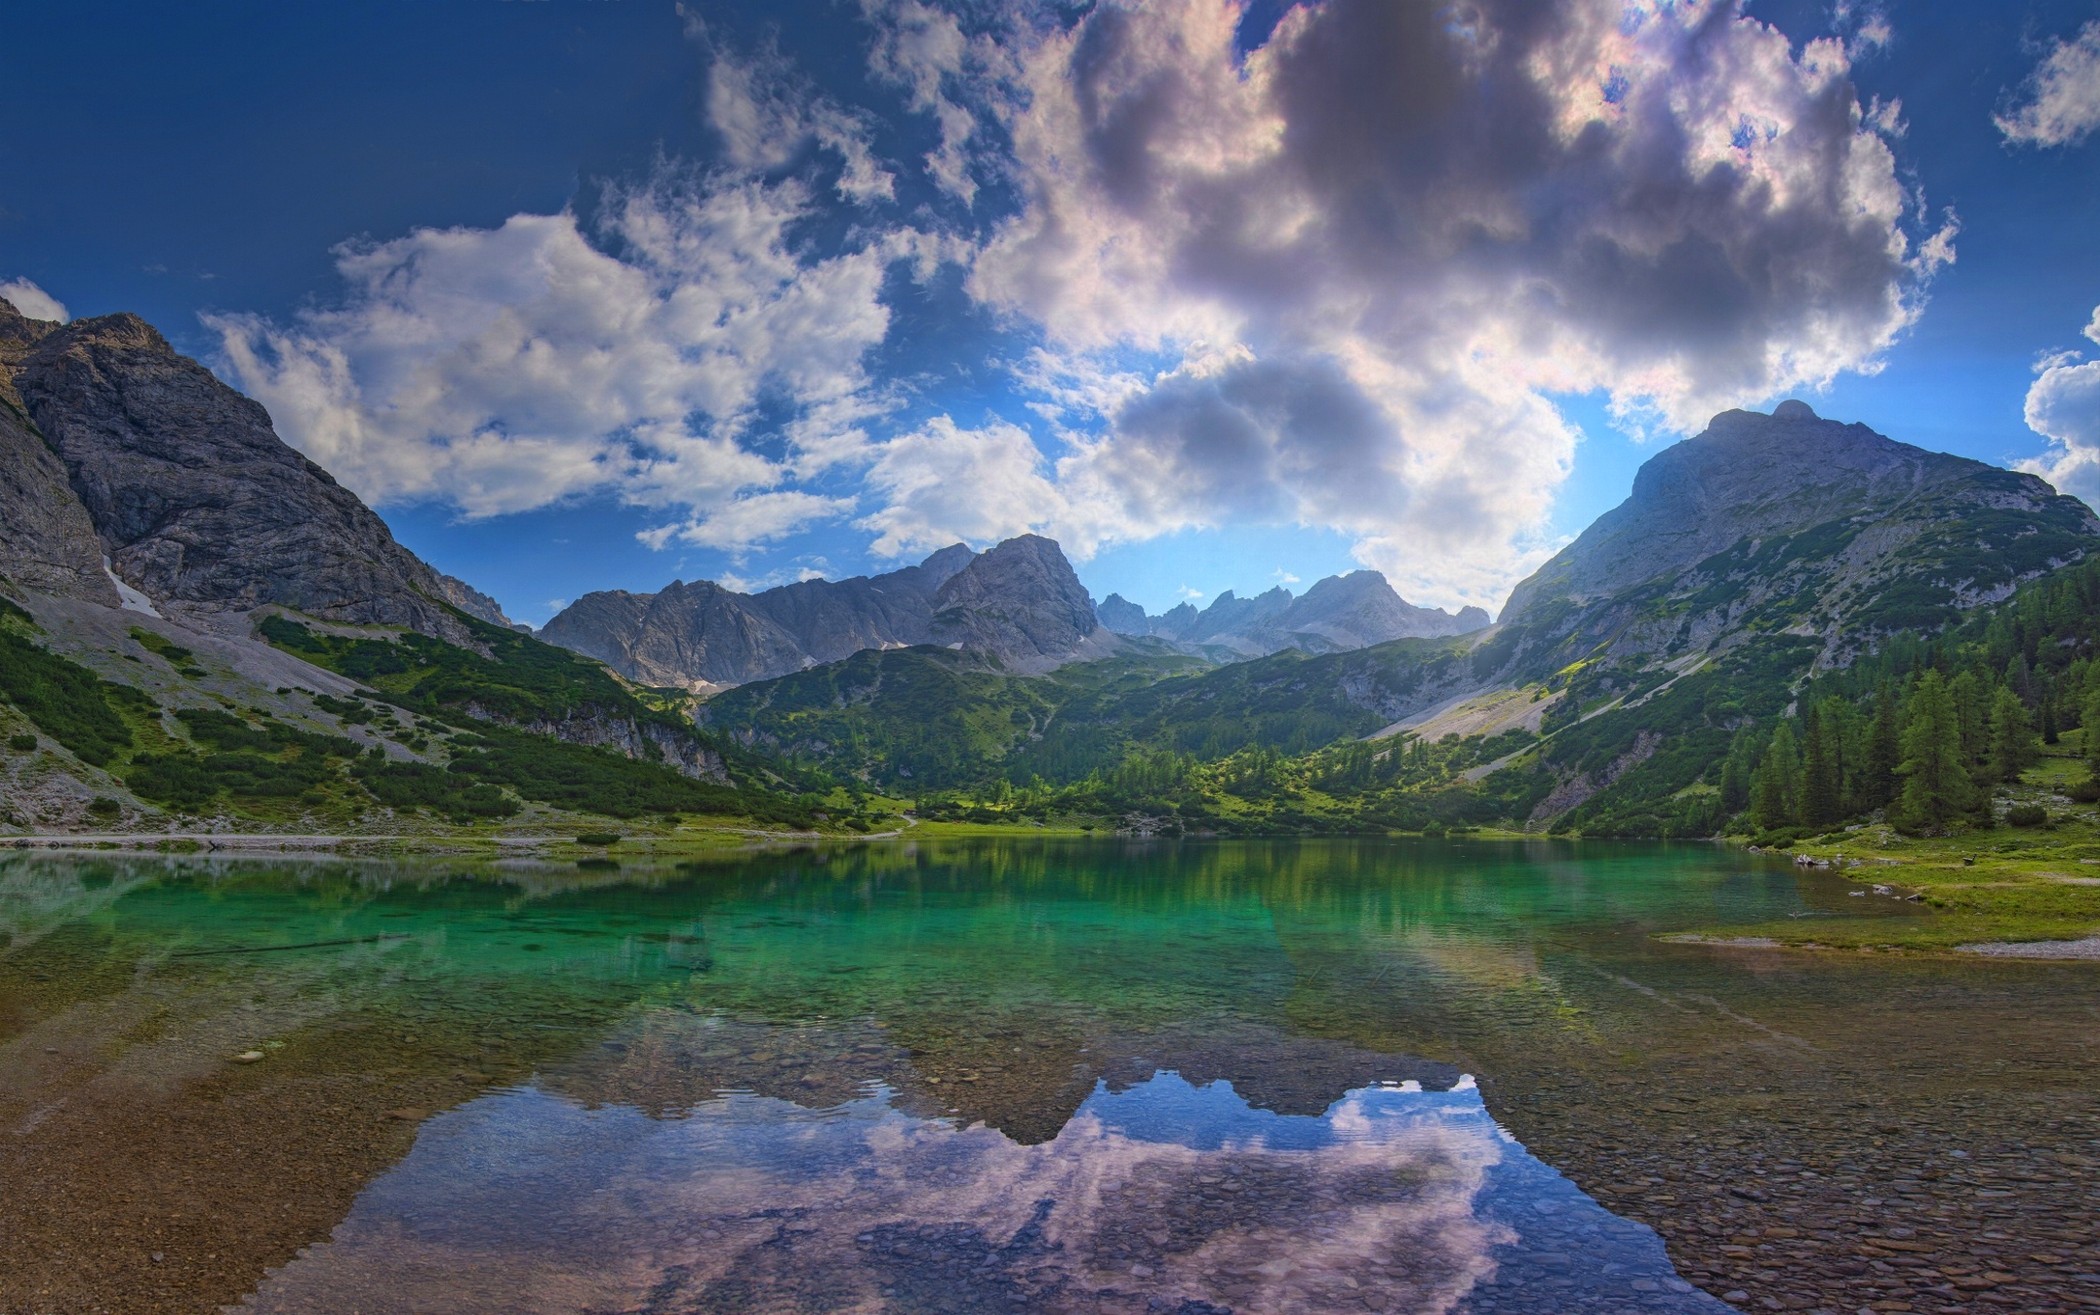 General 2100x1315 nature landscape summer lake mountains Austria clouds trees water reflection